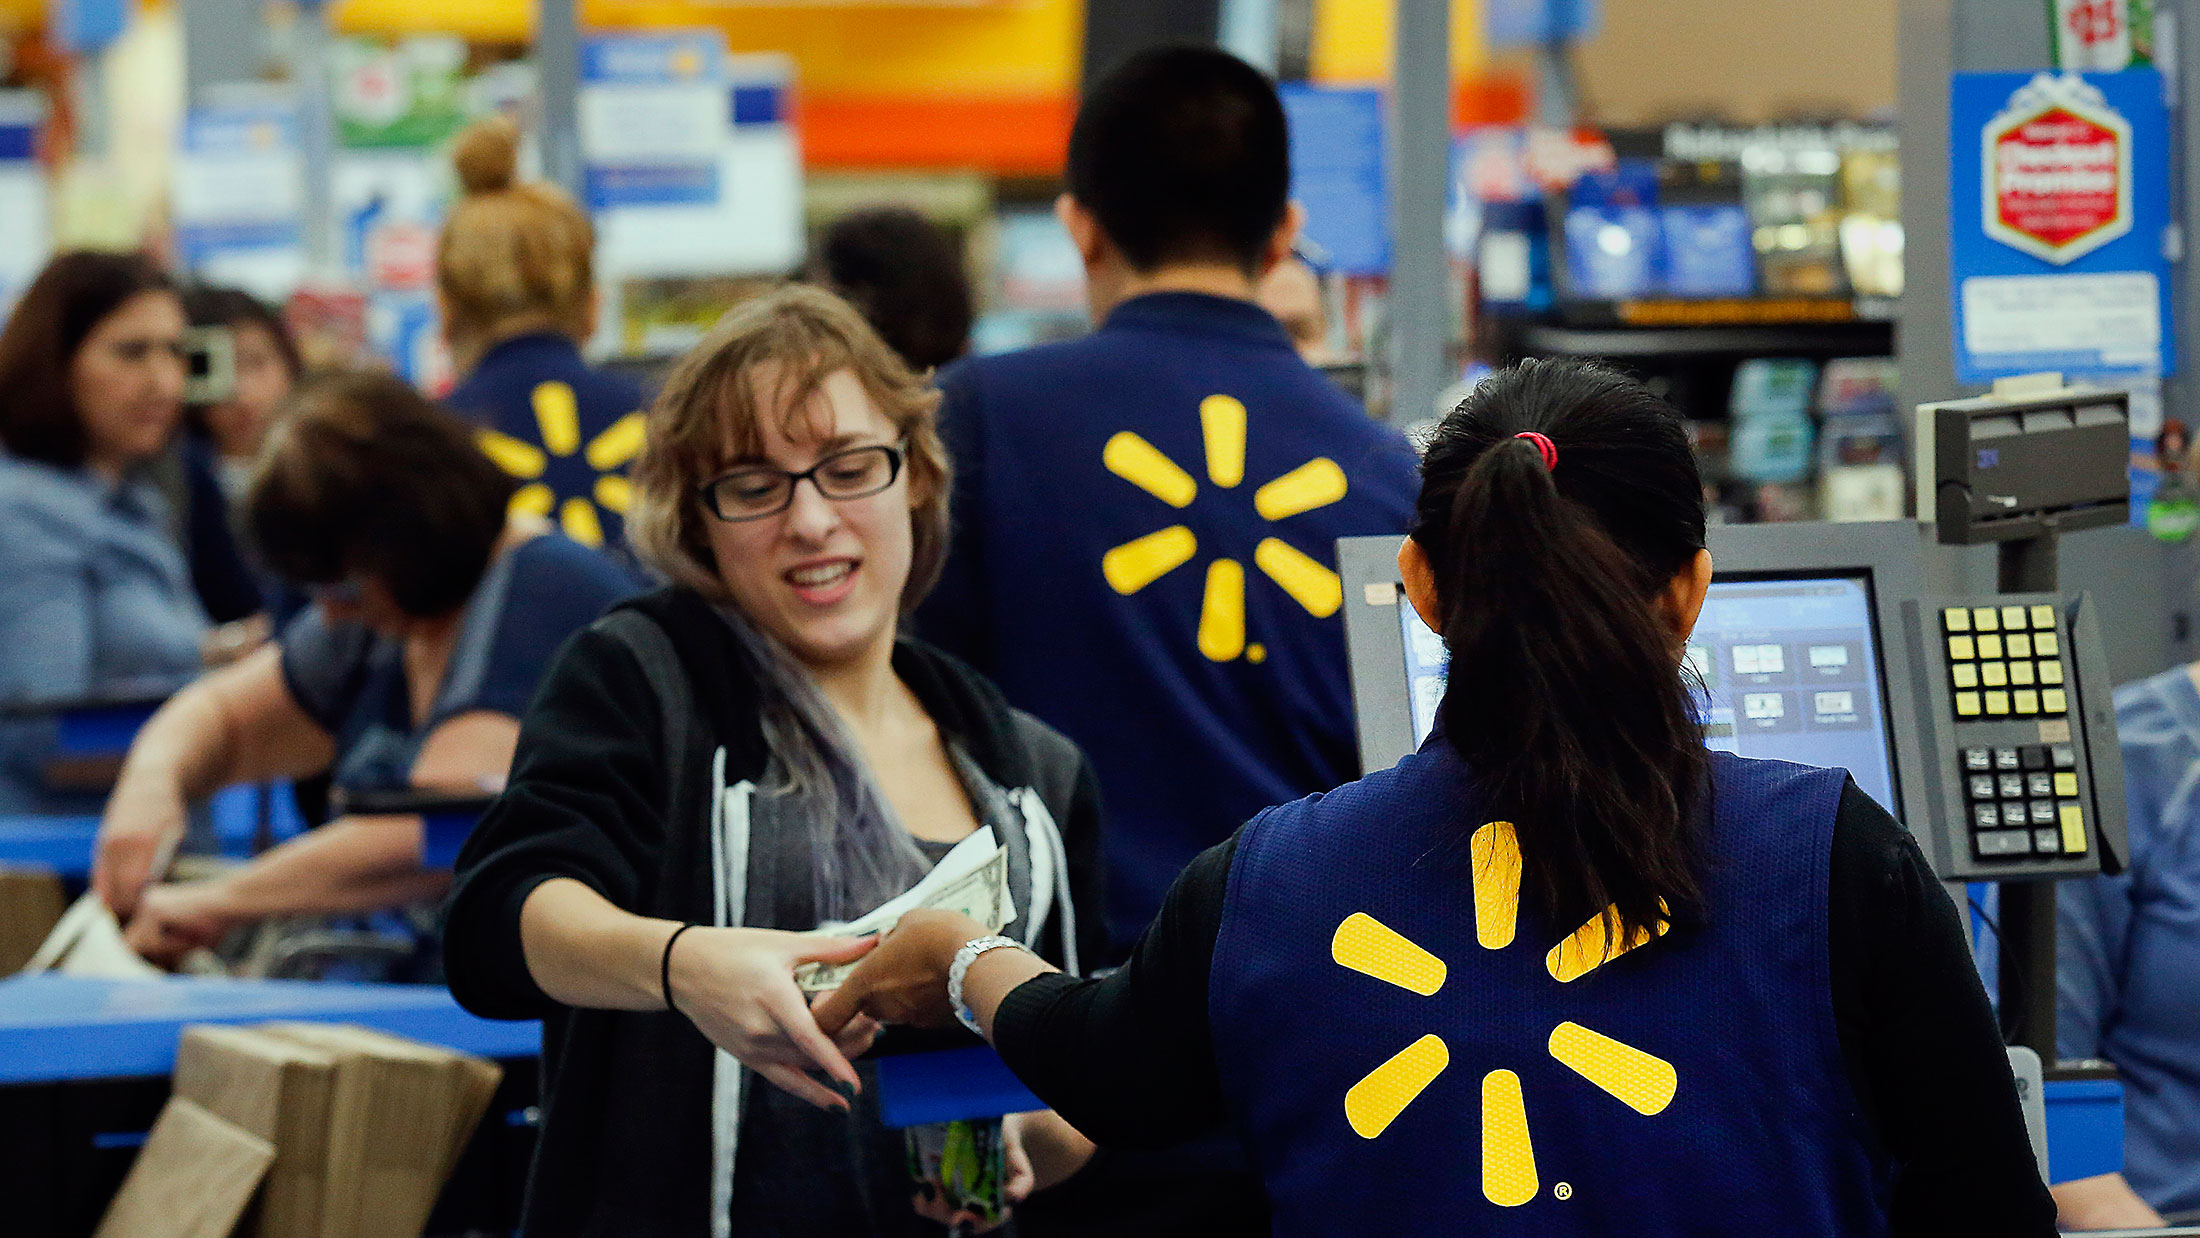 Wal-Mart Reaches 'Line in Sand' Moment in Push to Improve Stores ...